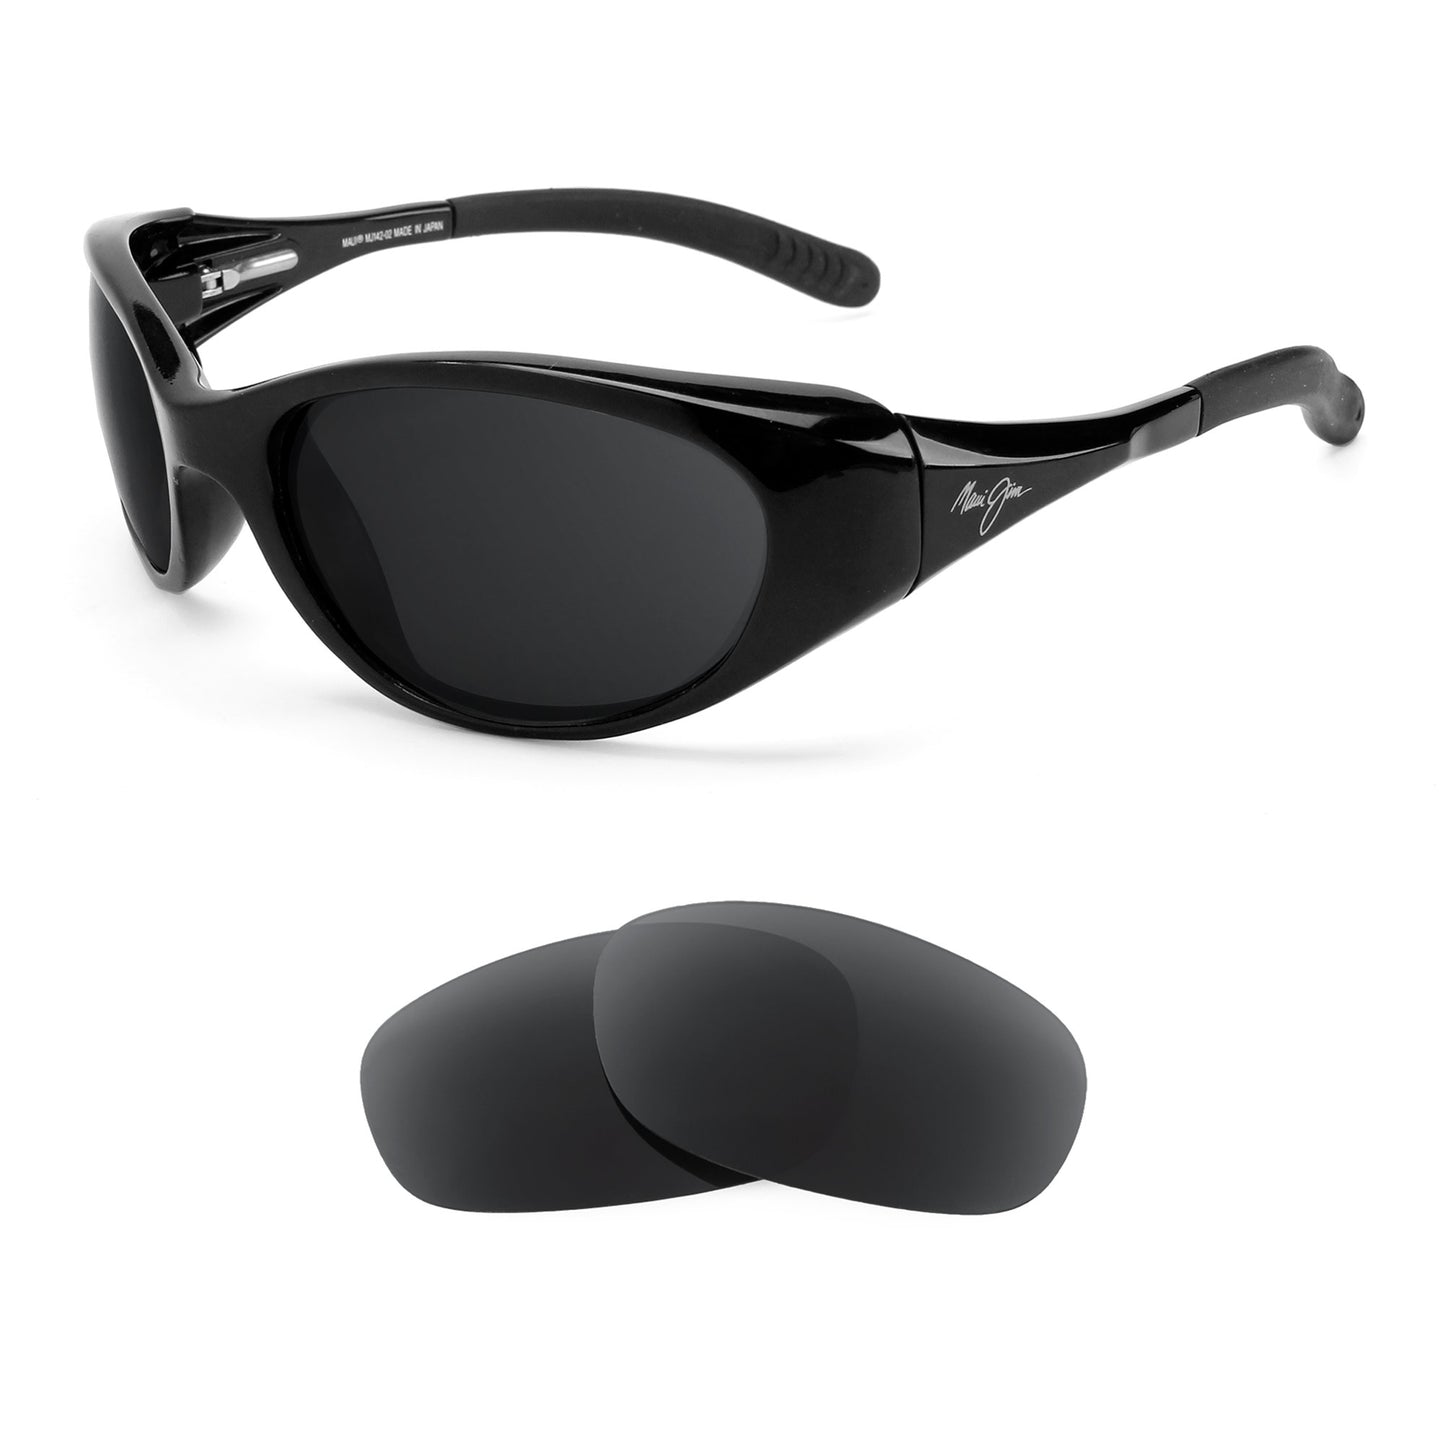 Maui Jim Volcano MJ142 sunglasses with replacement lenses